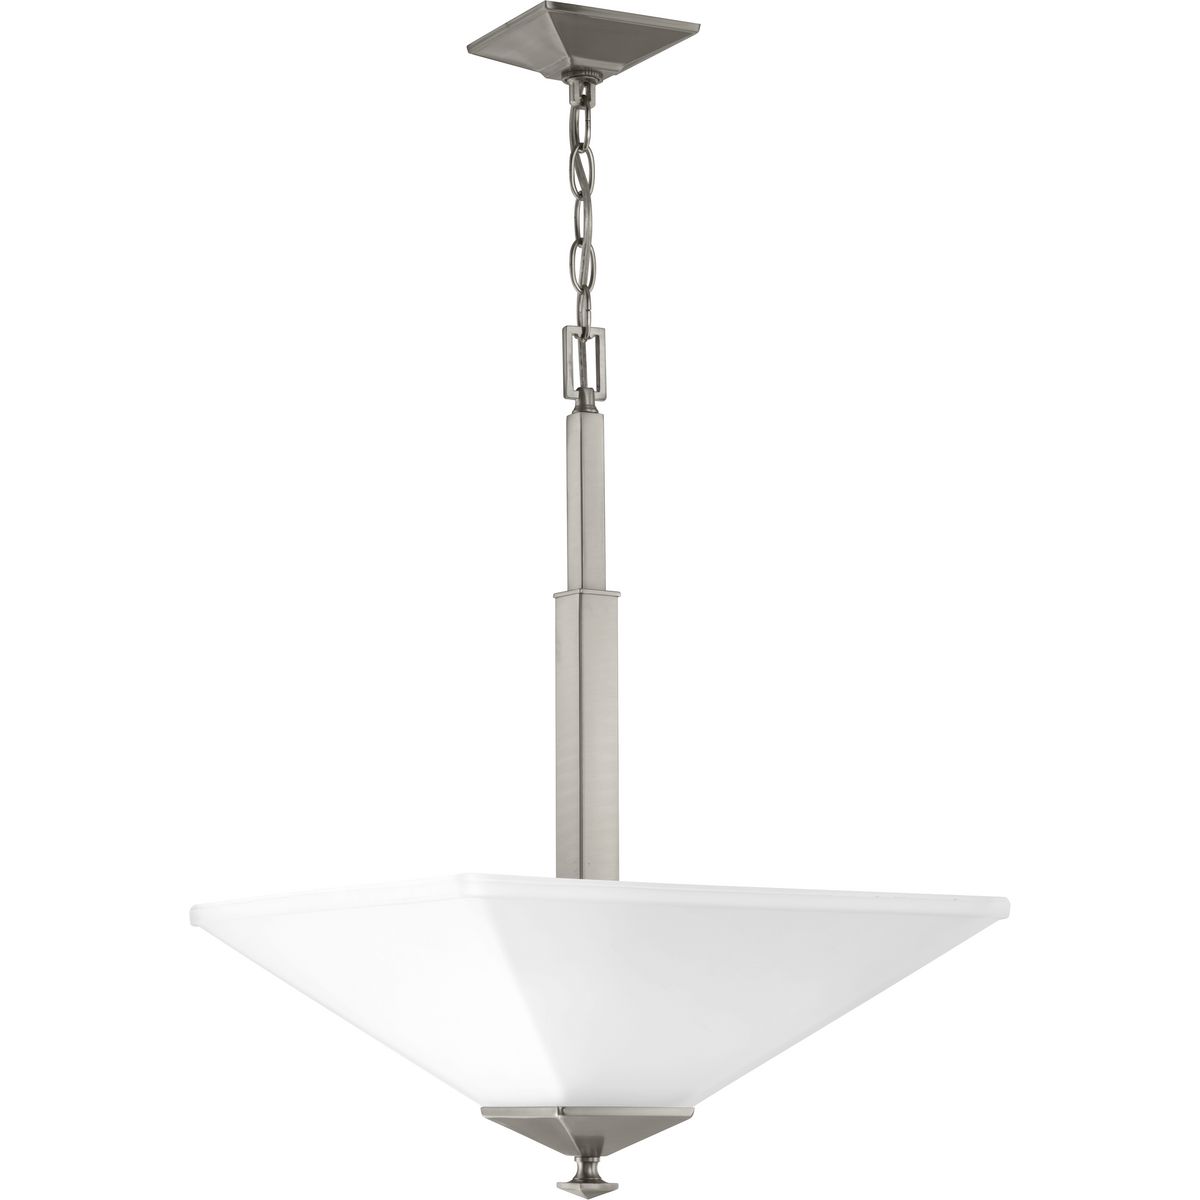 Distinctive chiseled features and clean lines are key features within the Clifton Heights collection. Inspired by an updated interpretation of Craftsman styling, careful attention to the details delivers a dramatic accent. A Brushed Nickel finish complements elegant etched square glass shades. The Clifton Heights collection enhances a variety of home styles including Farmhouse, Craftsman and Transitional decor. Two-Light Inverted Pendant.